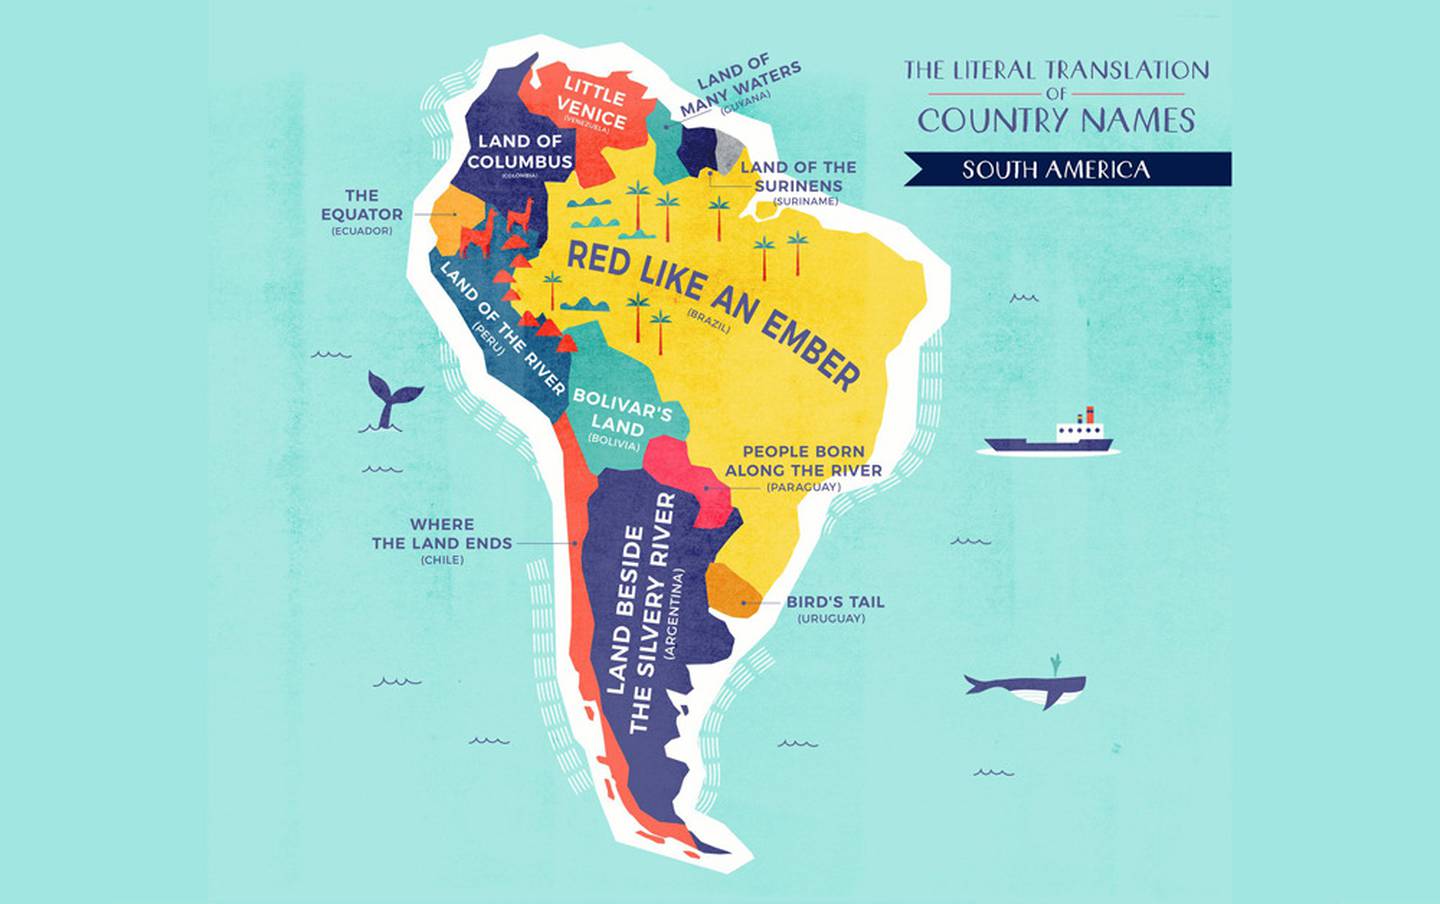 south america literal country names